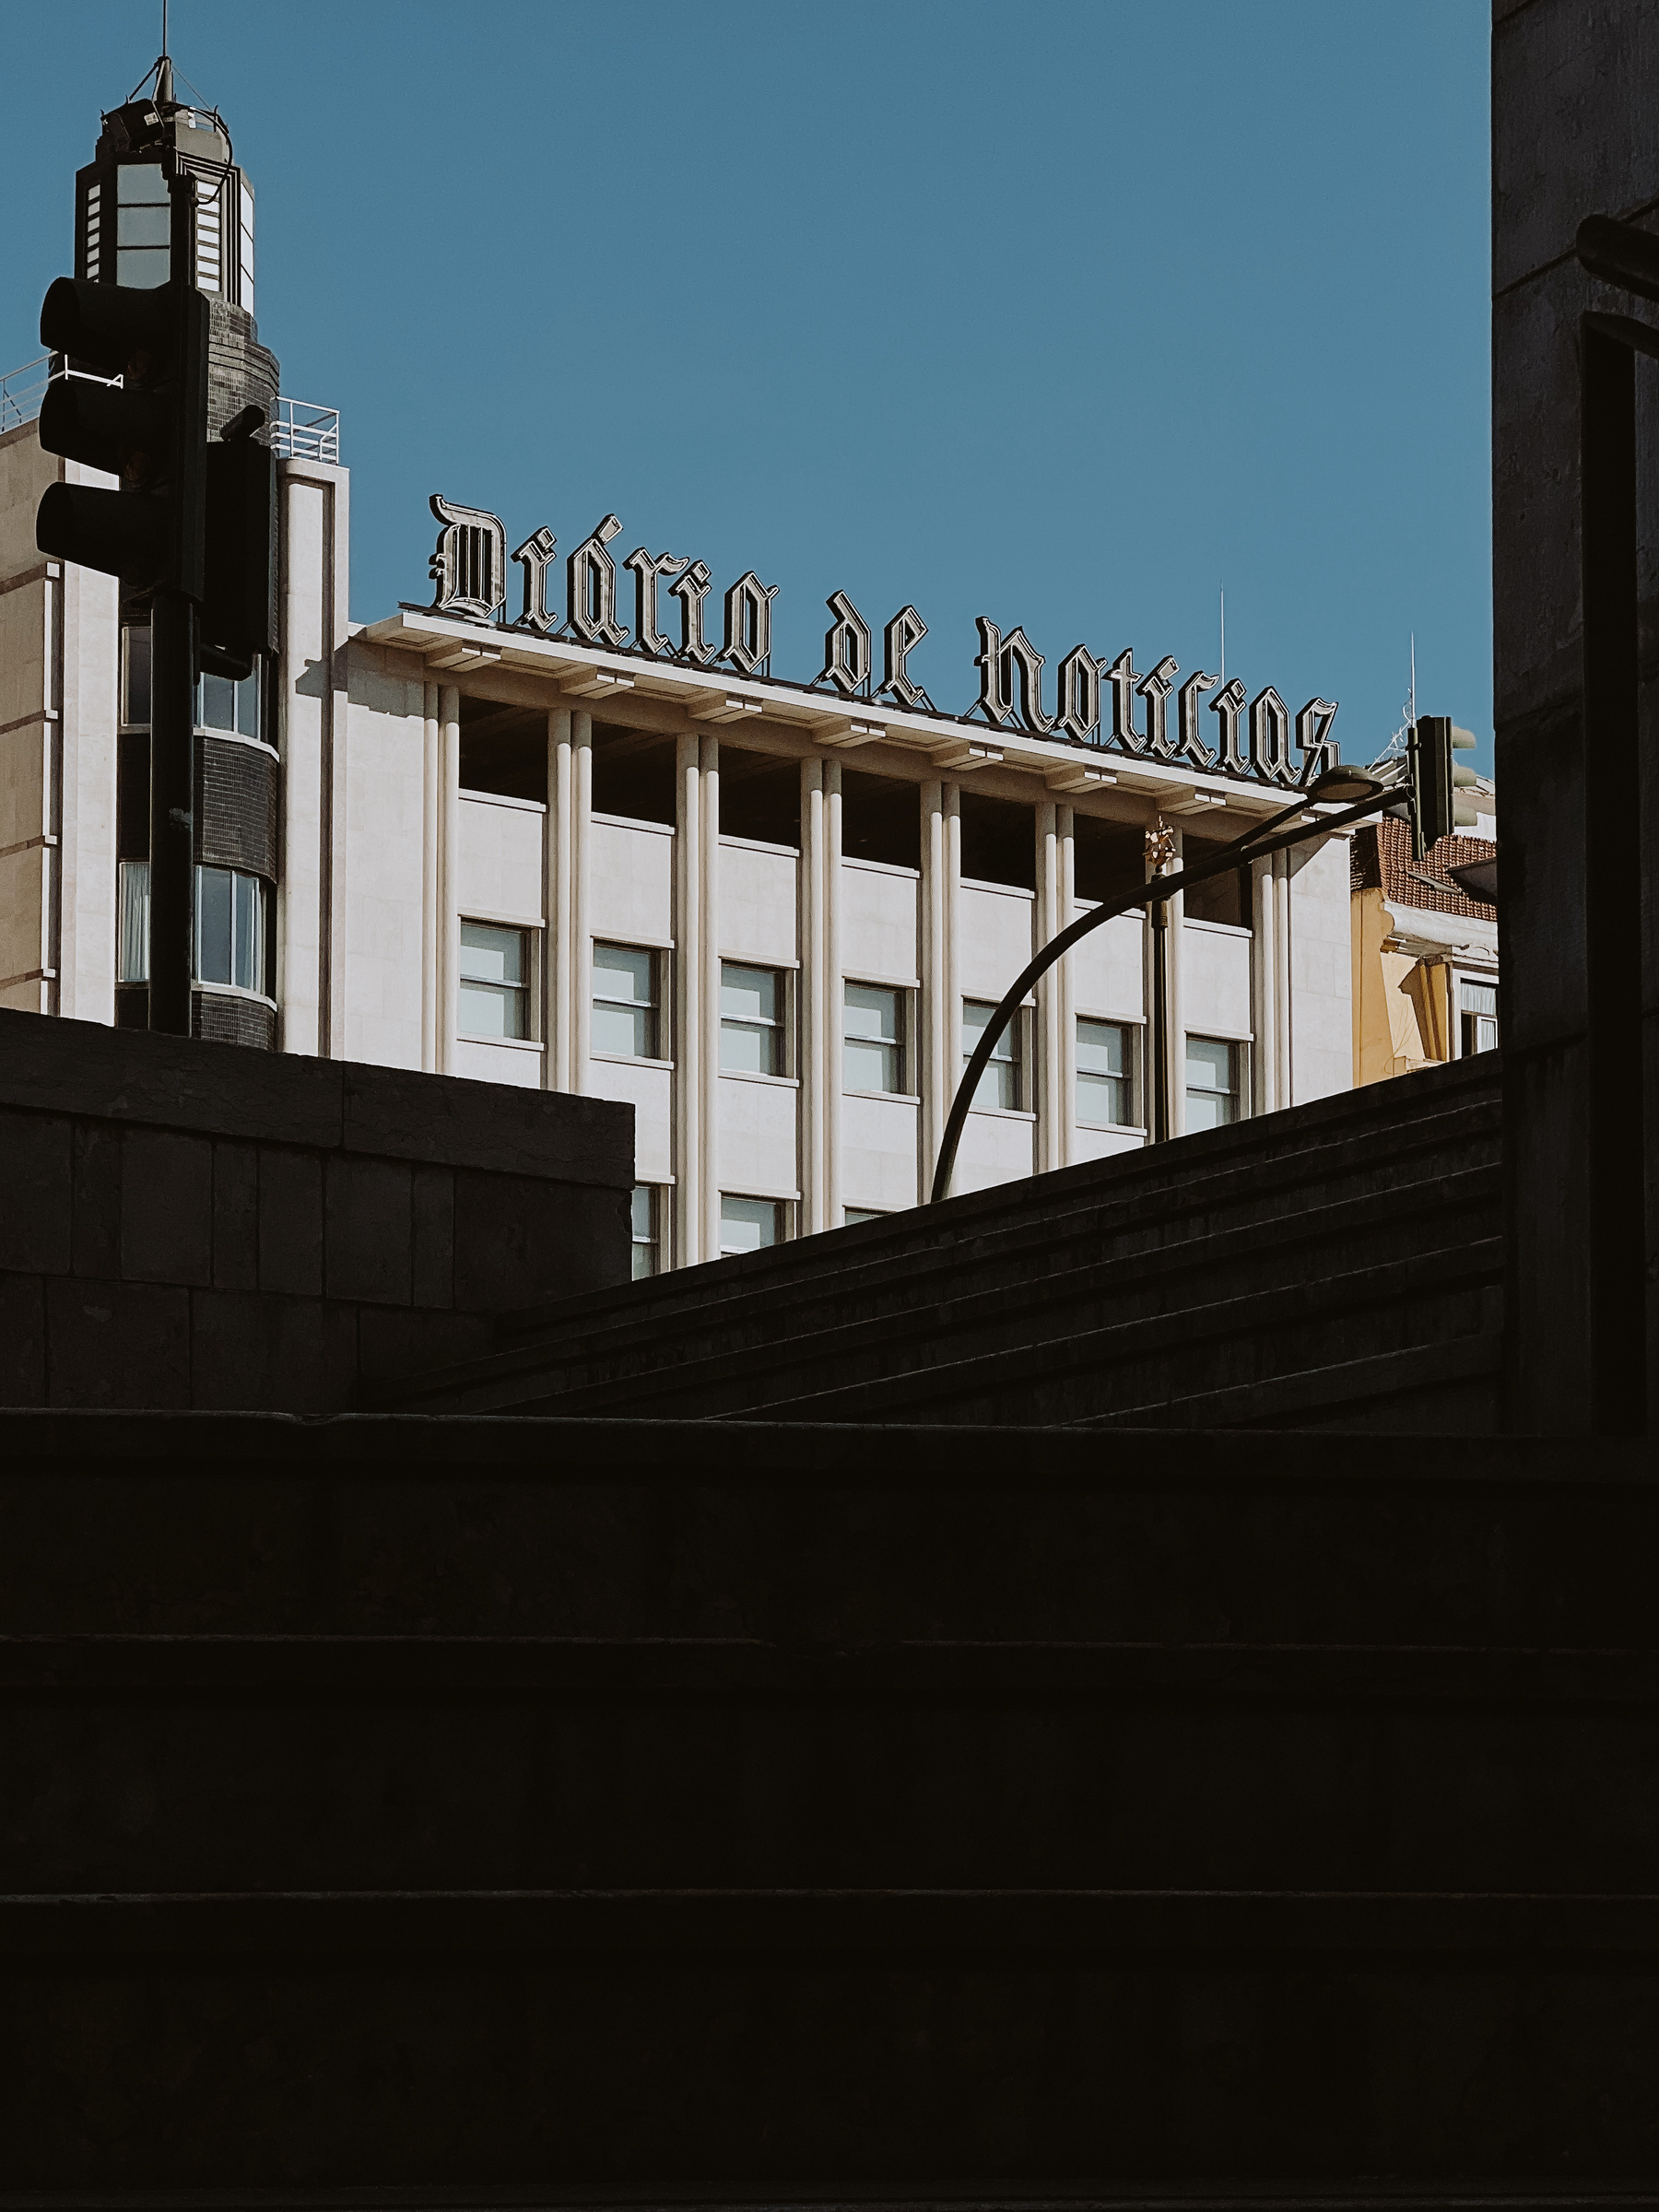 A building with the sign &ldquo;Diário de Notícias&rdquo; atop, visible over a flight of stone steps, with a streetlamp and traffic lights in the foreground against a clear sky.